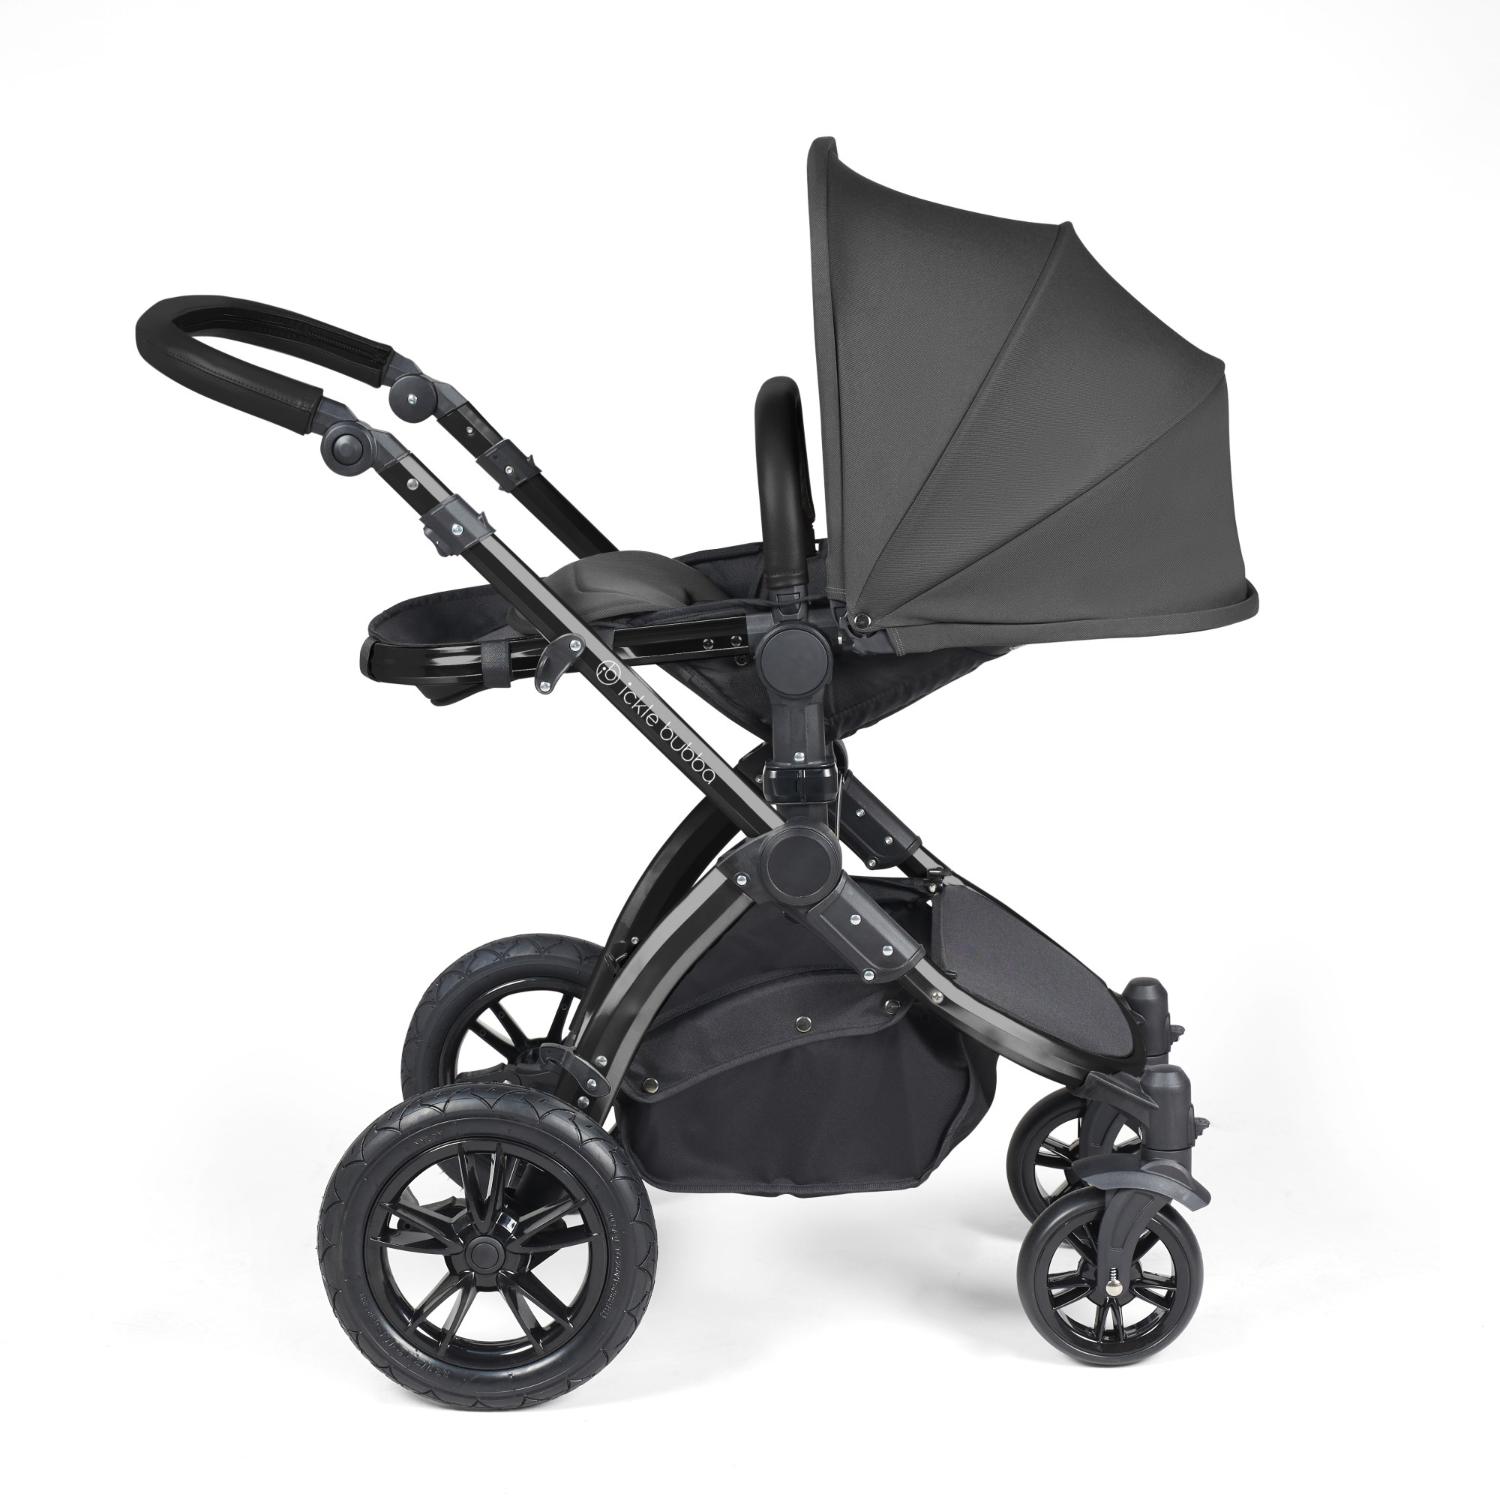 Recline position of Ickle Bubba Stomp Luxe Pushchair in Charcoal Grey colour